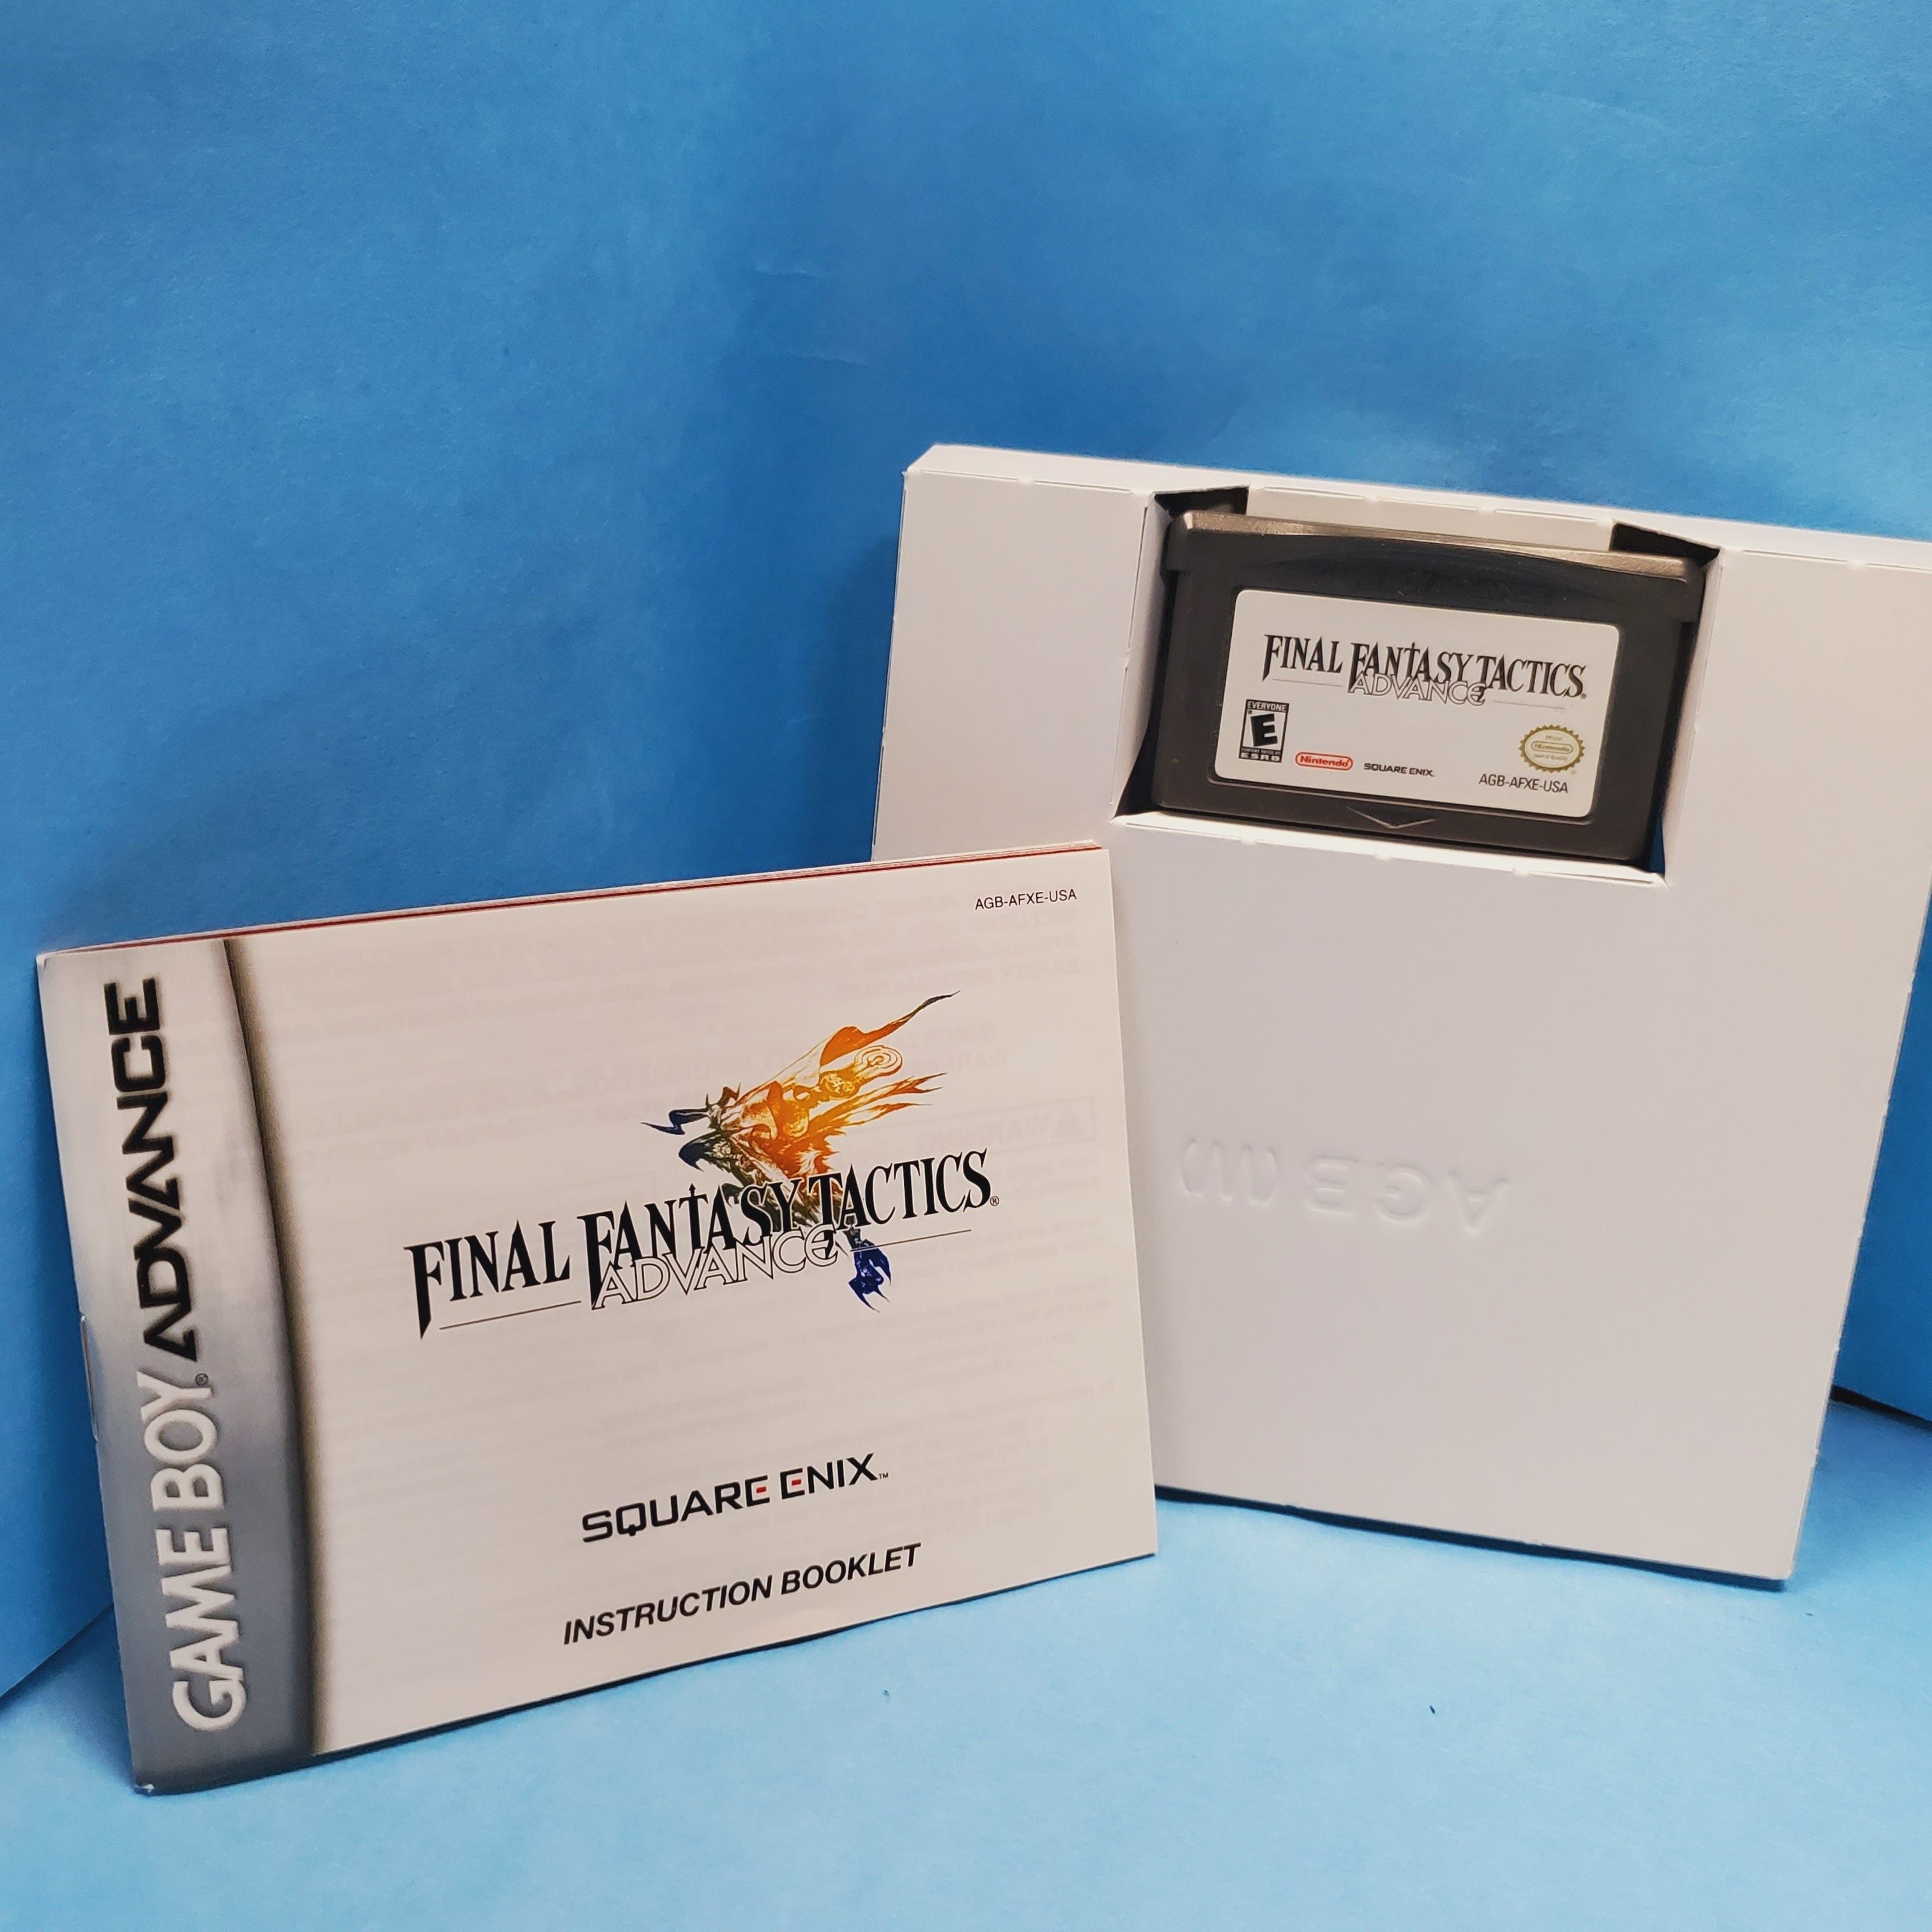 GBA - Final Fantasy Tactics Advance (Complete in Box / A+ / With Manual)